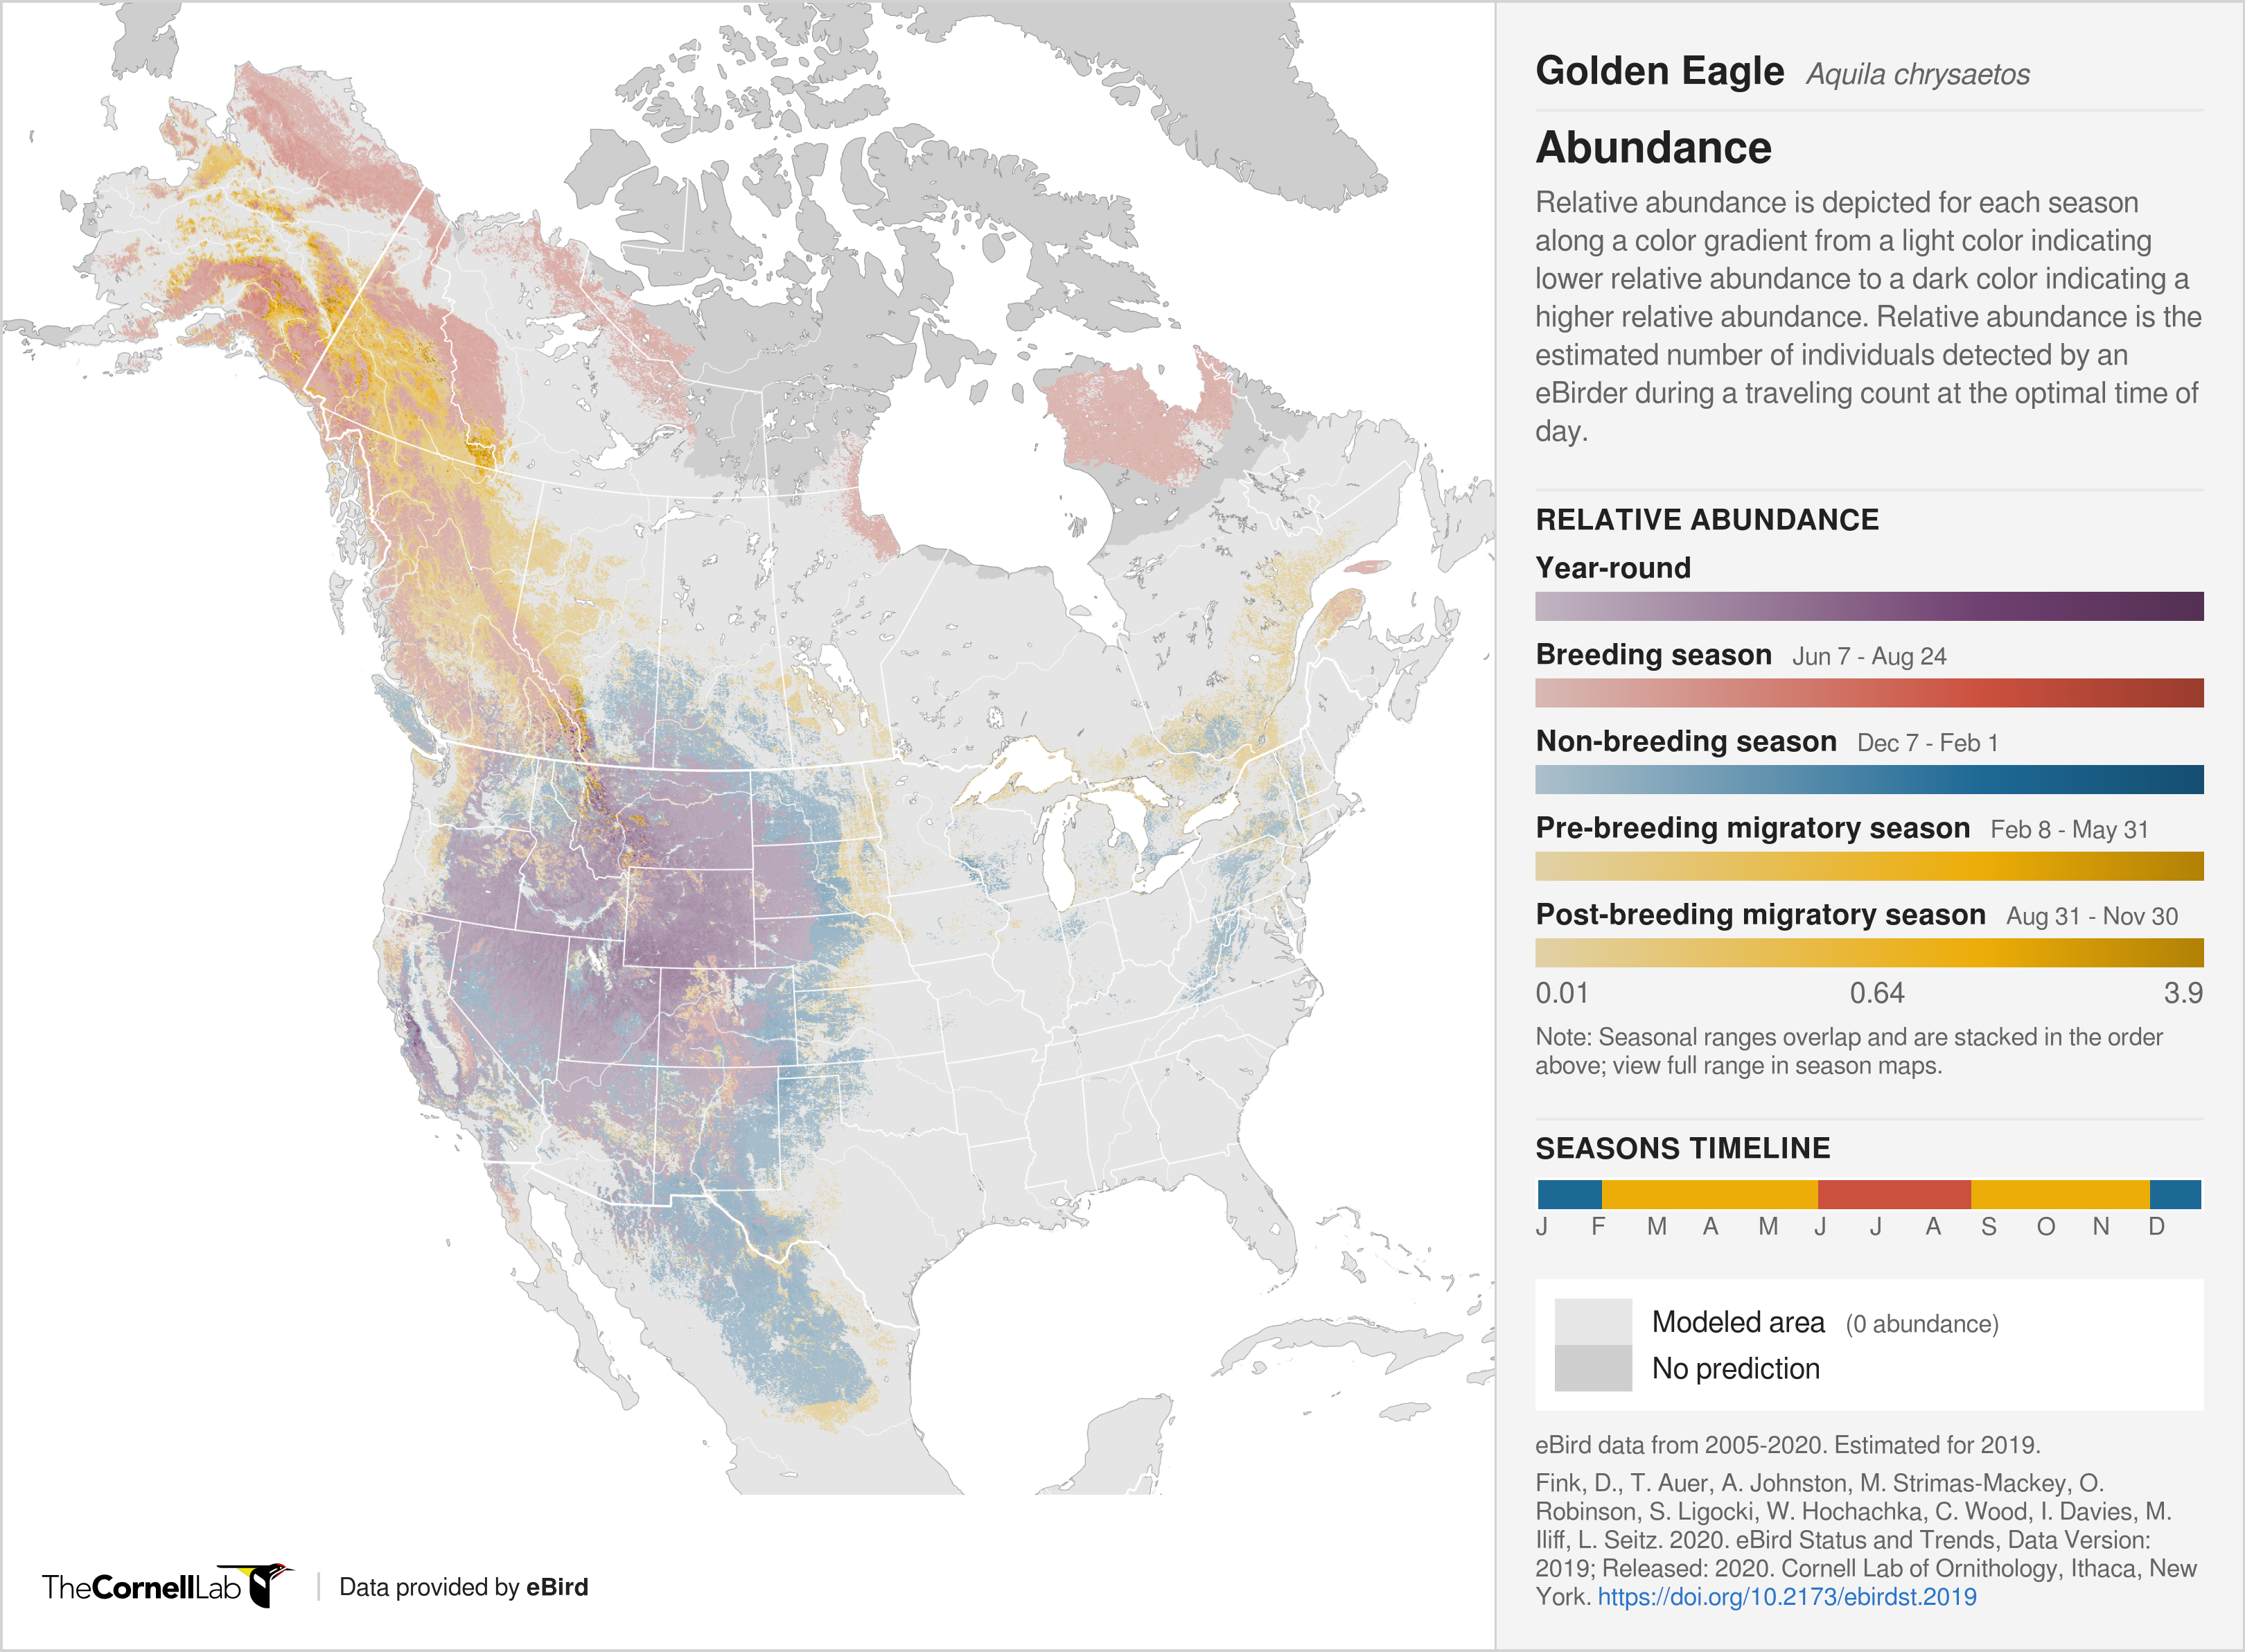 a map showing the abundance of golden eagles in north america